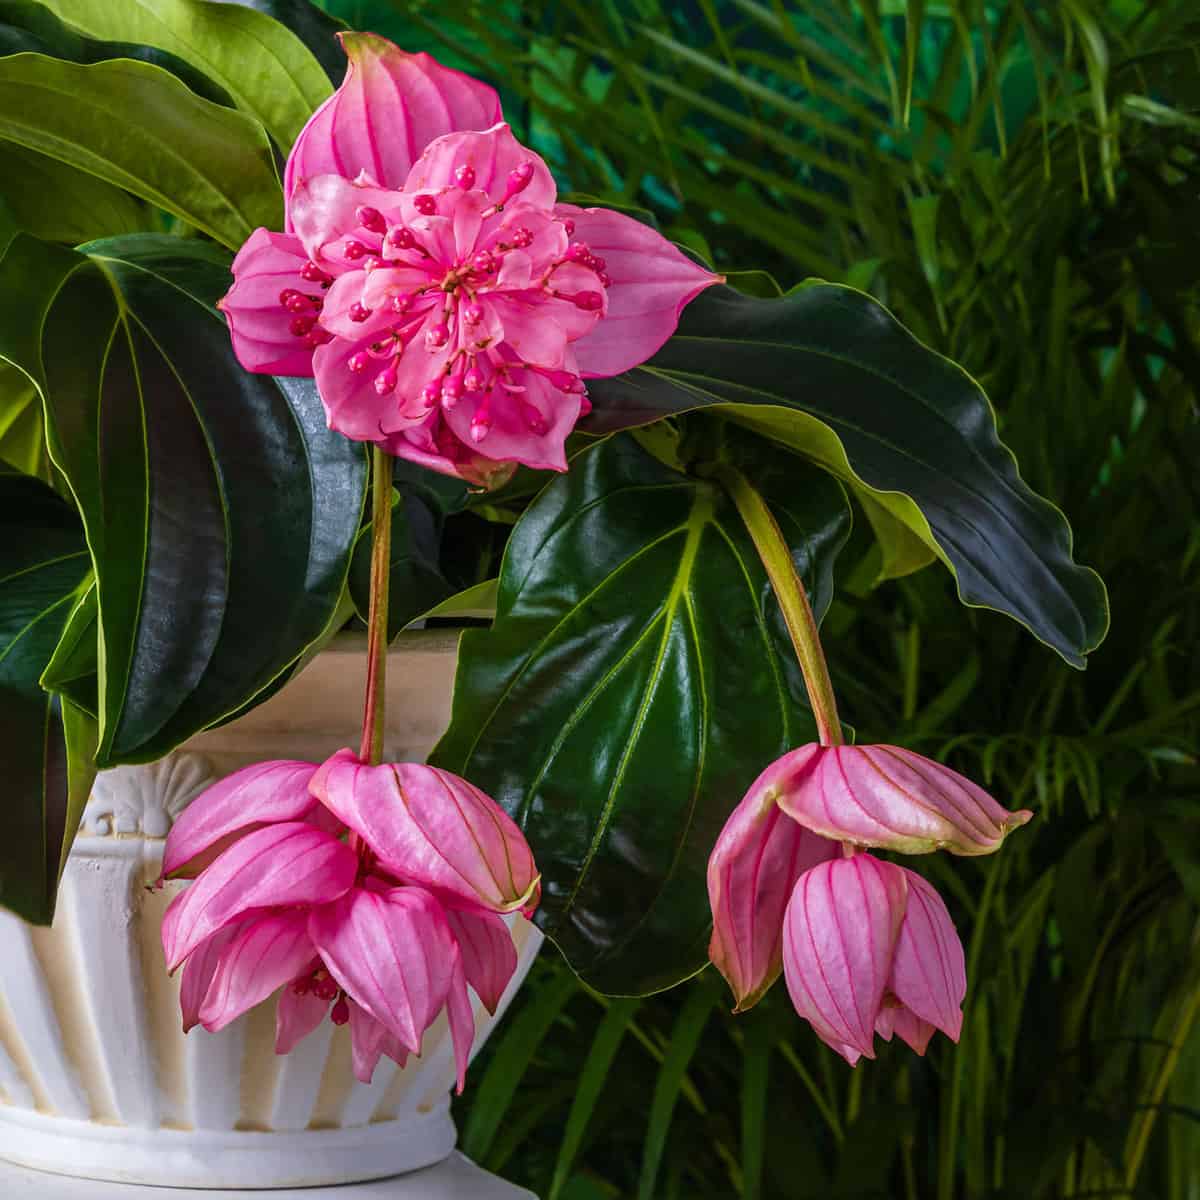 Pink flowers medinilla magnifica on green palm leaves background Medinilla magnifica showy medinilla or rose grape beautiful blooms.